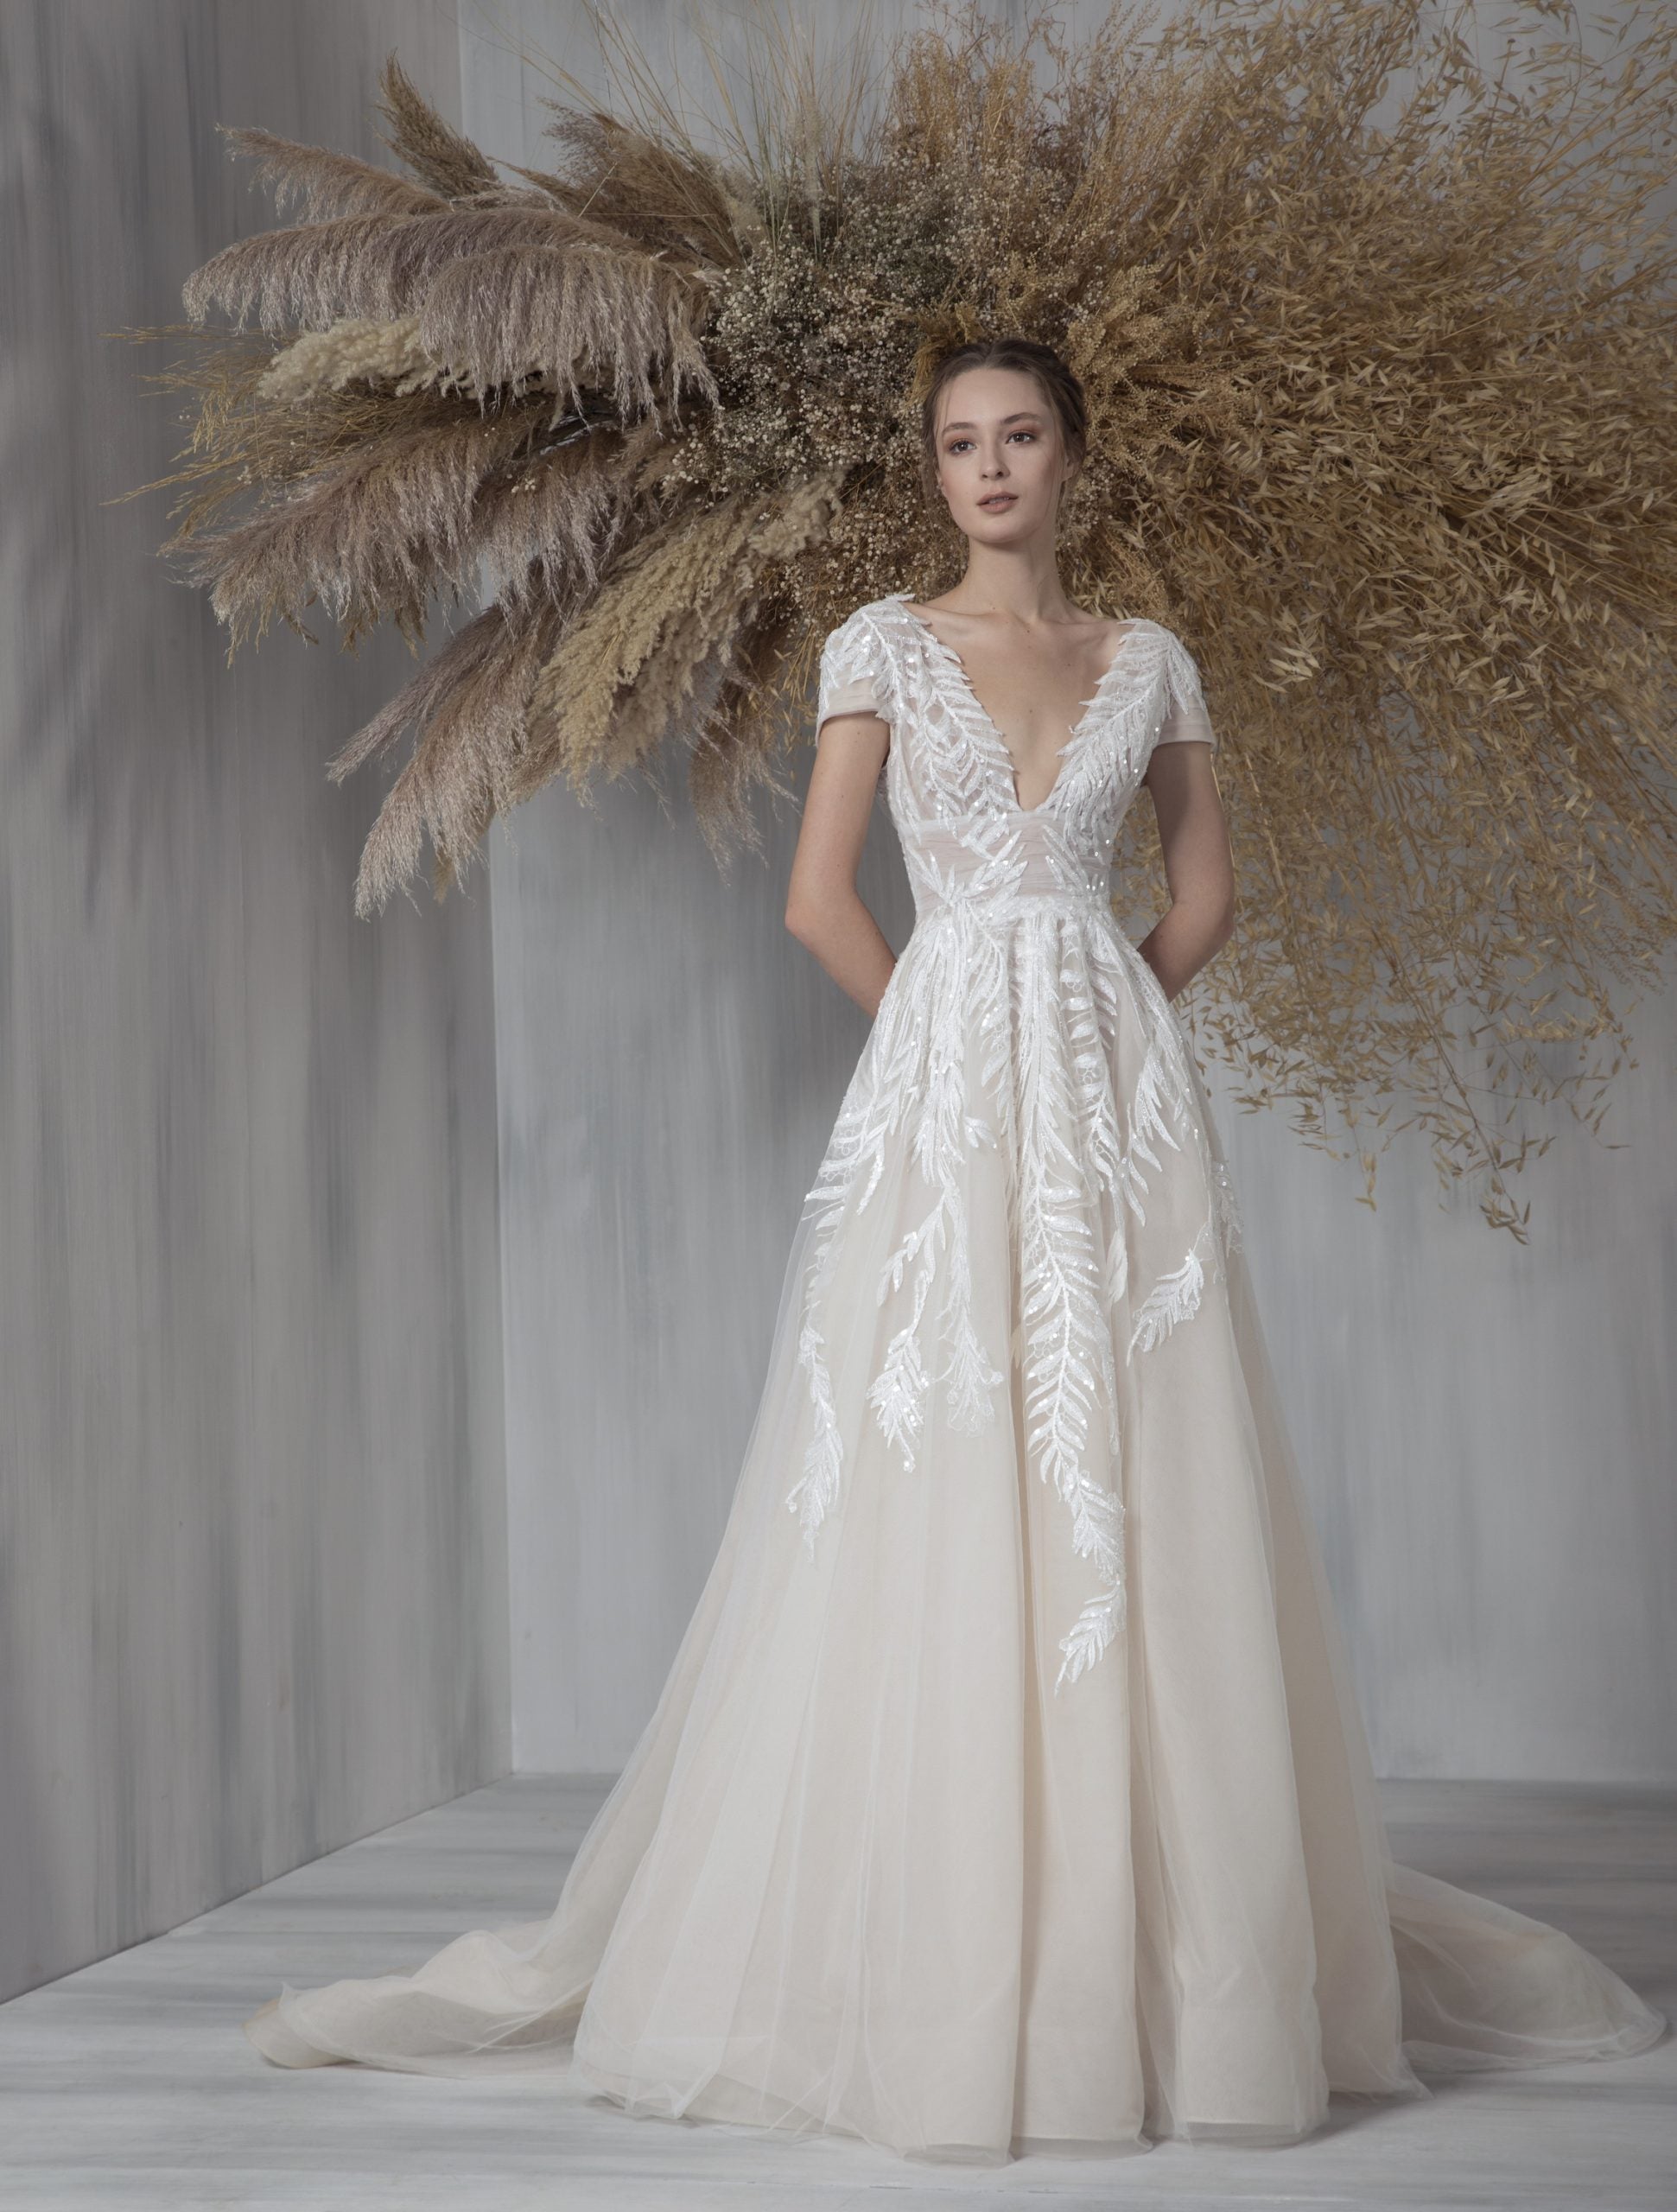 12 Dreamy Tulle Wedding Dresses To Consider For Your Big Day